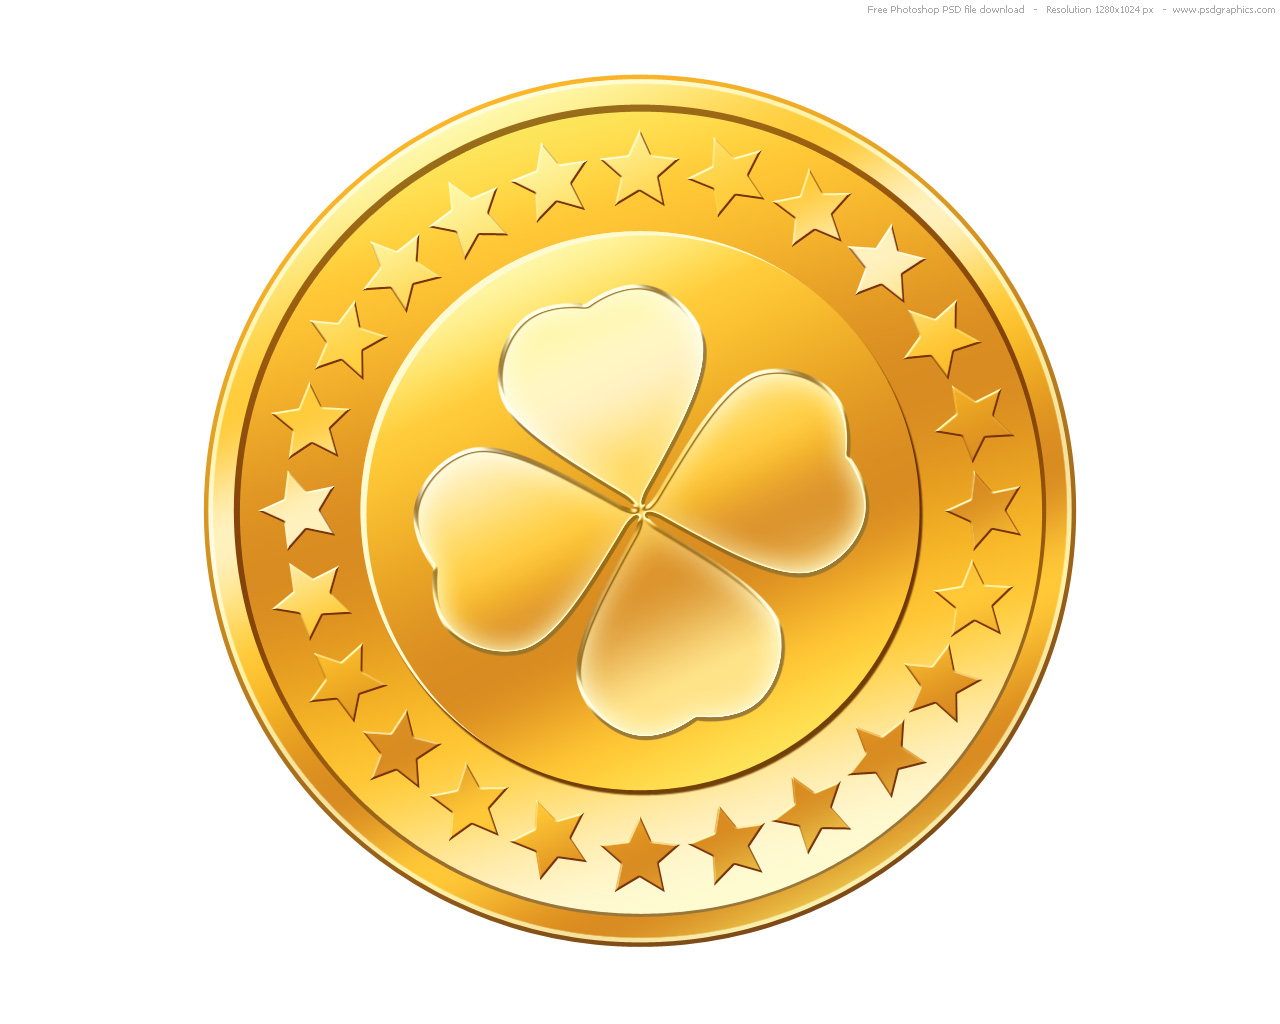 Psd Gold Coin Icon   Psdgraphics